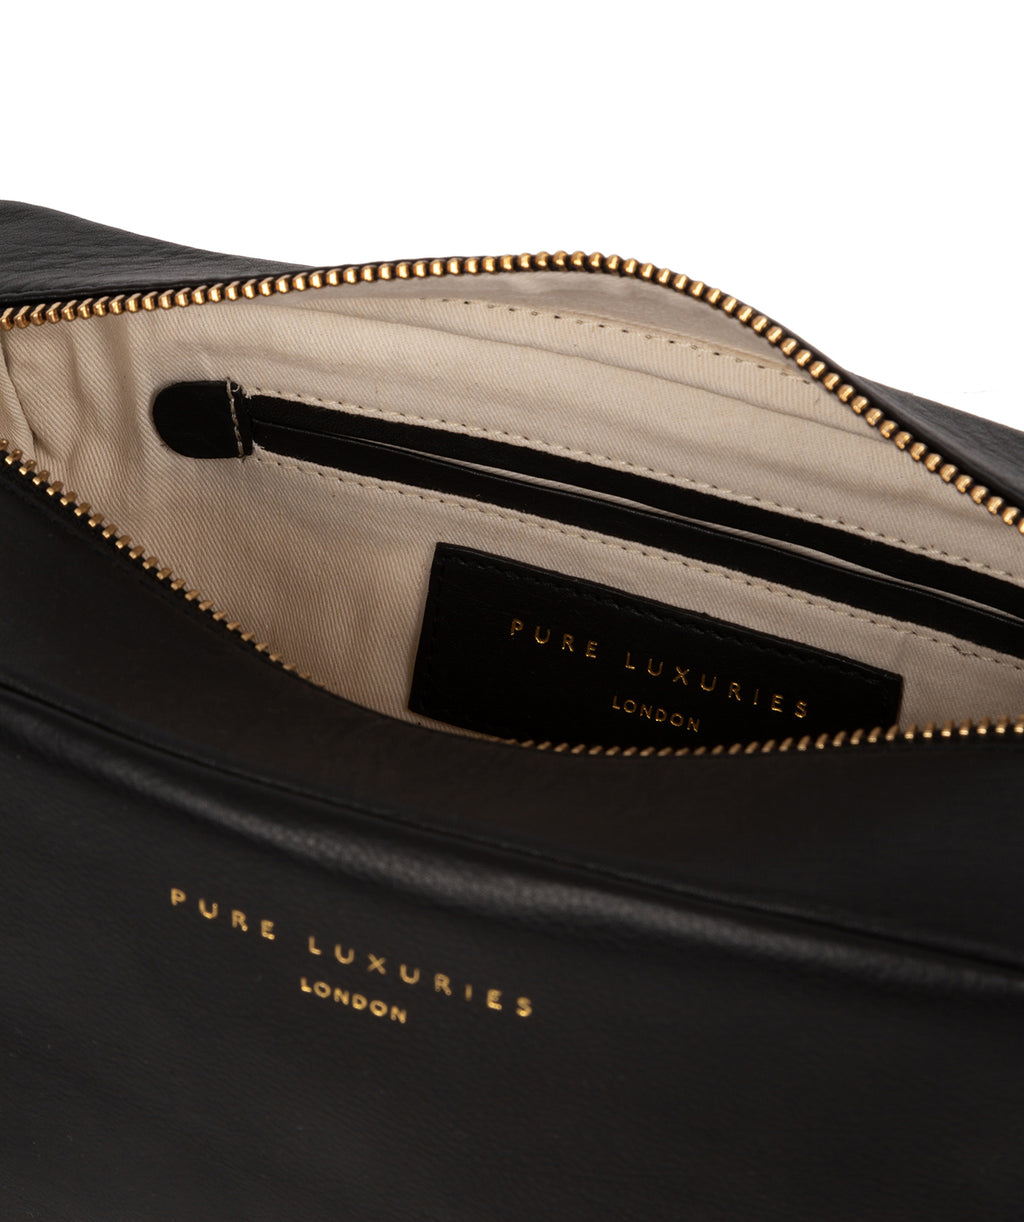 Black Leather Make-up Bag 'Highgate' by Pure Luxuries – Pure Luxuries ...